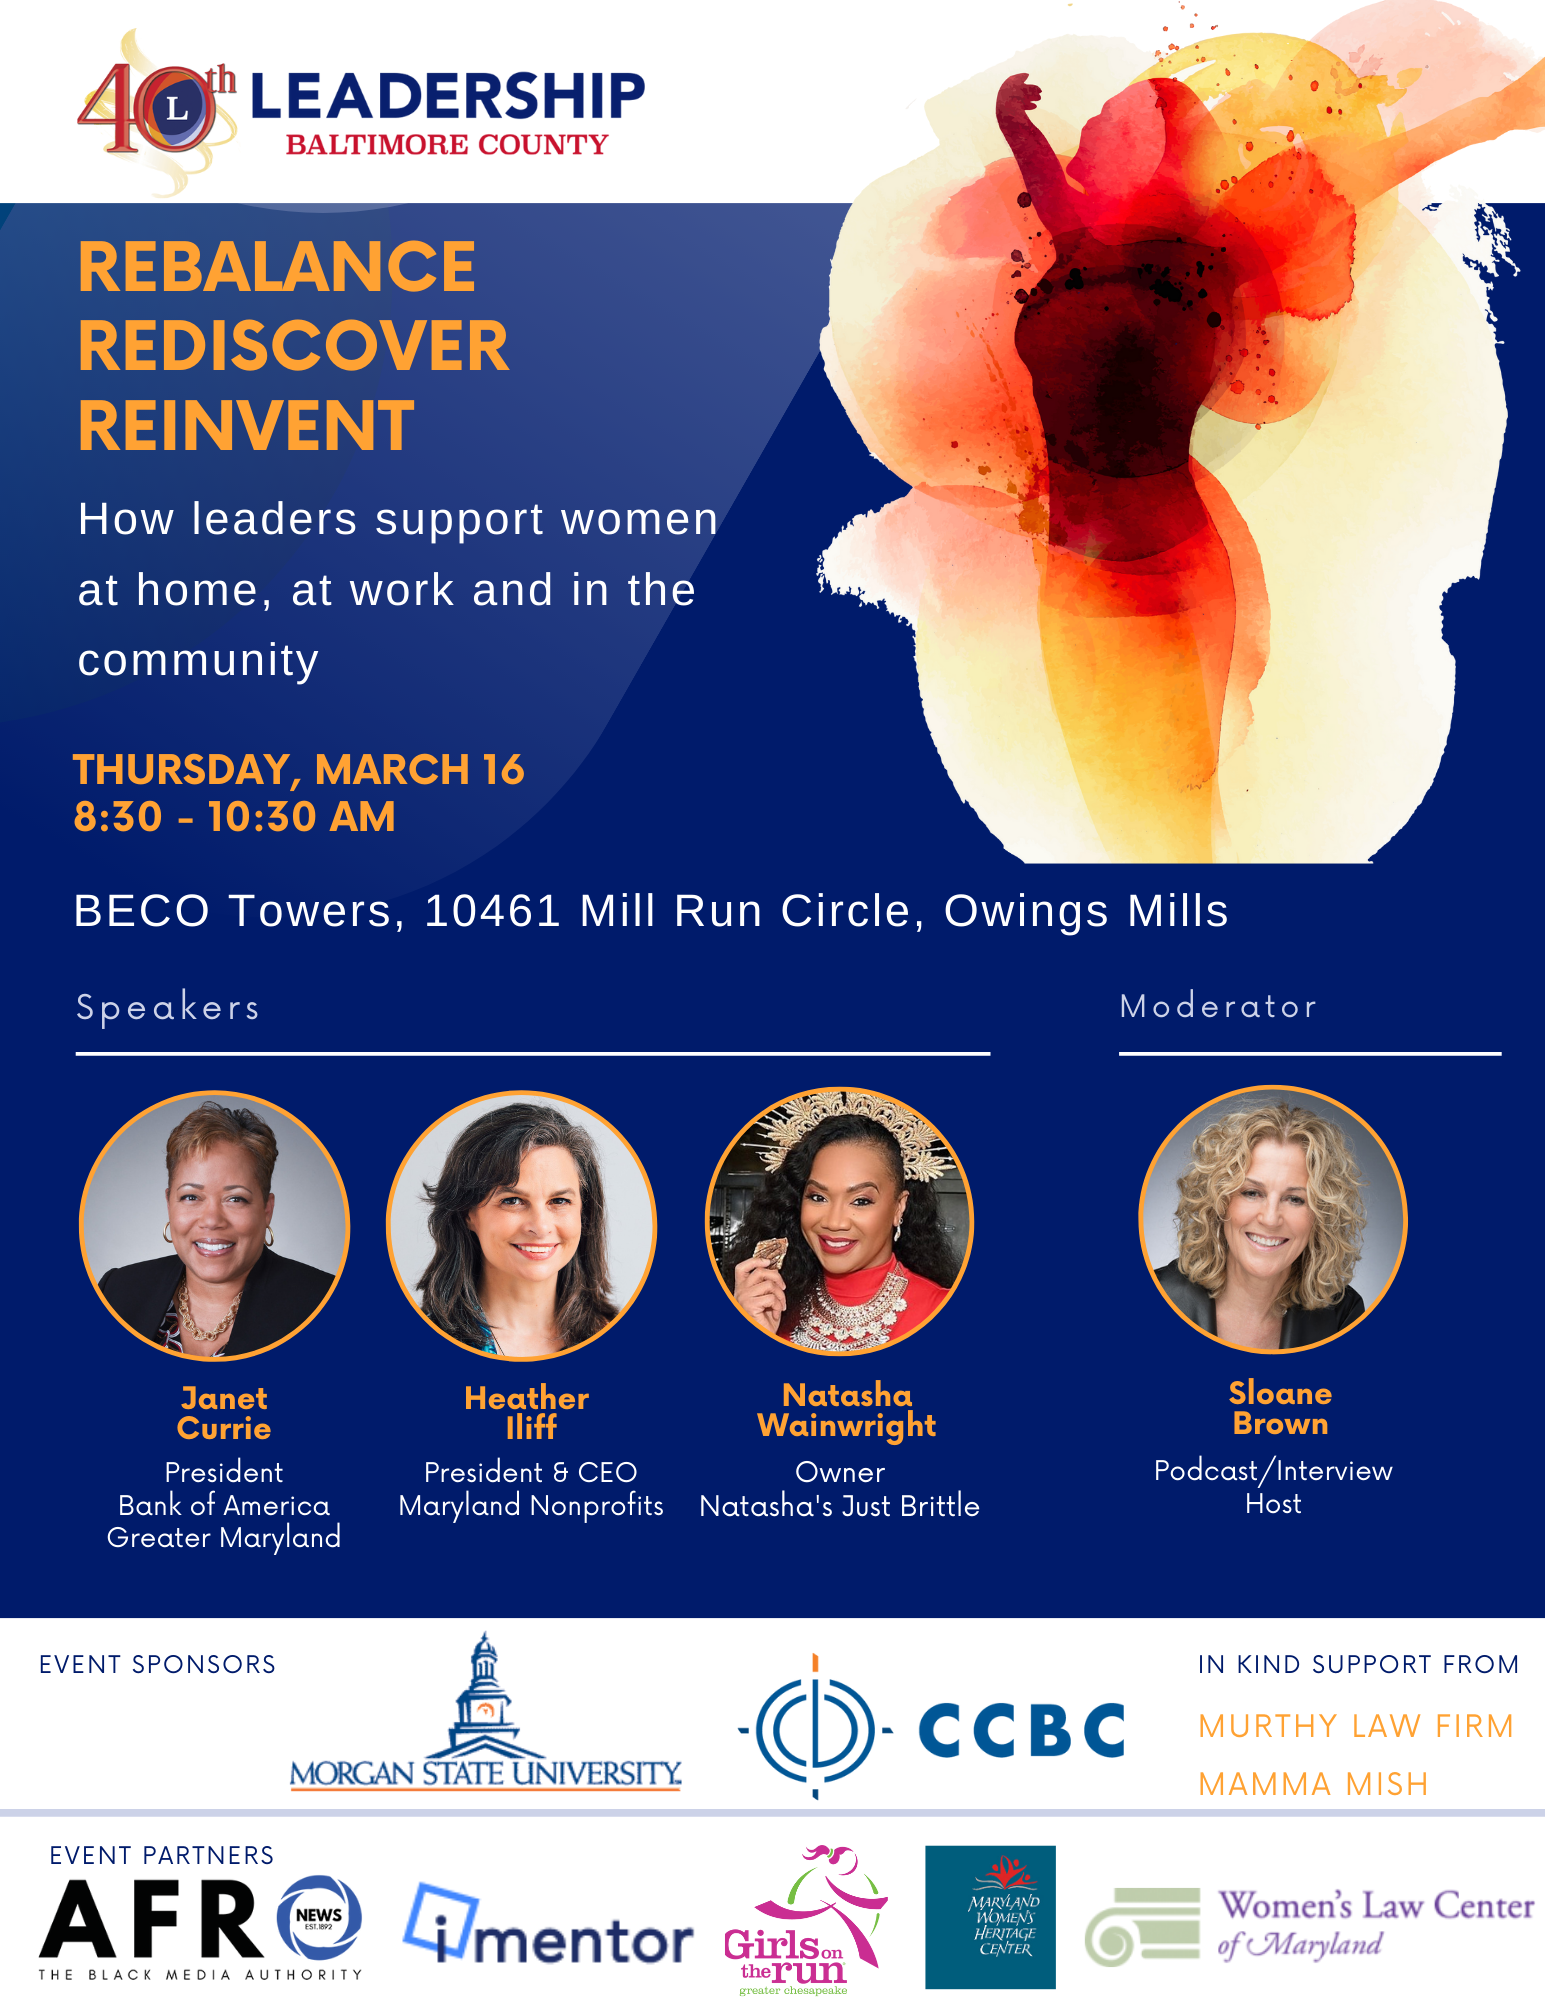 Rebalance, Rediscover, Reinvent. How leaders support women at home, at work and in the community. Thursday, March 16, 8:30-10:30am. BECO Towers, 10461 Mill Run Circle, Owings Mills. Speakers: Janet Currie, Bank of America; Heather Iliff, Maryland Nonprofits; Natasha Wainwright, Natasha's Just Brittle. Moderator: Sloane Brown.